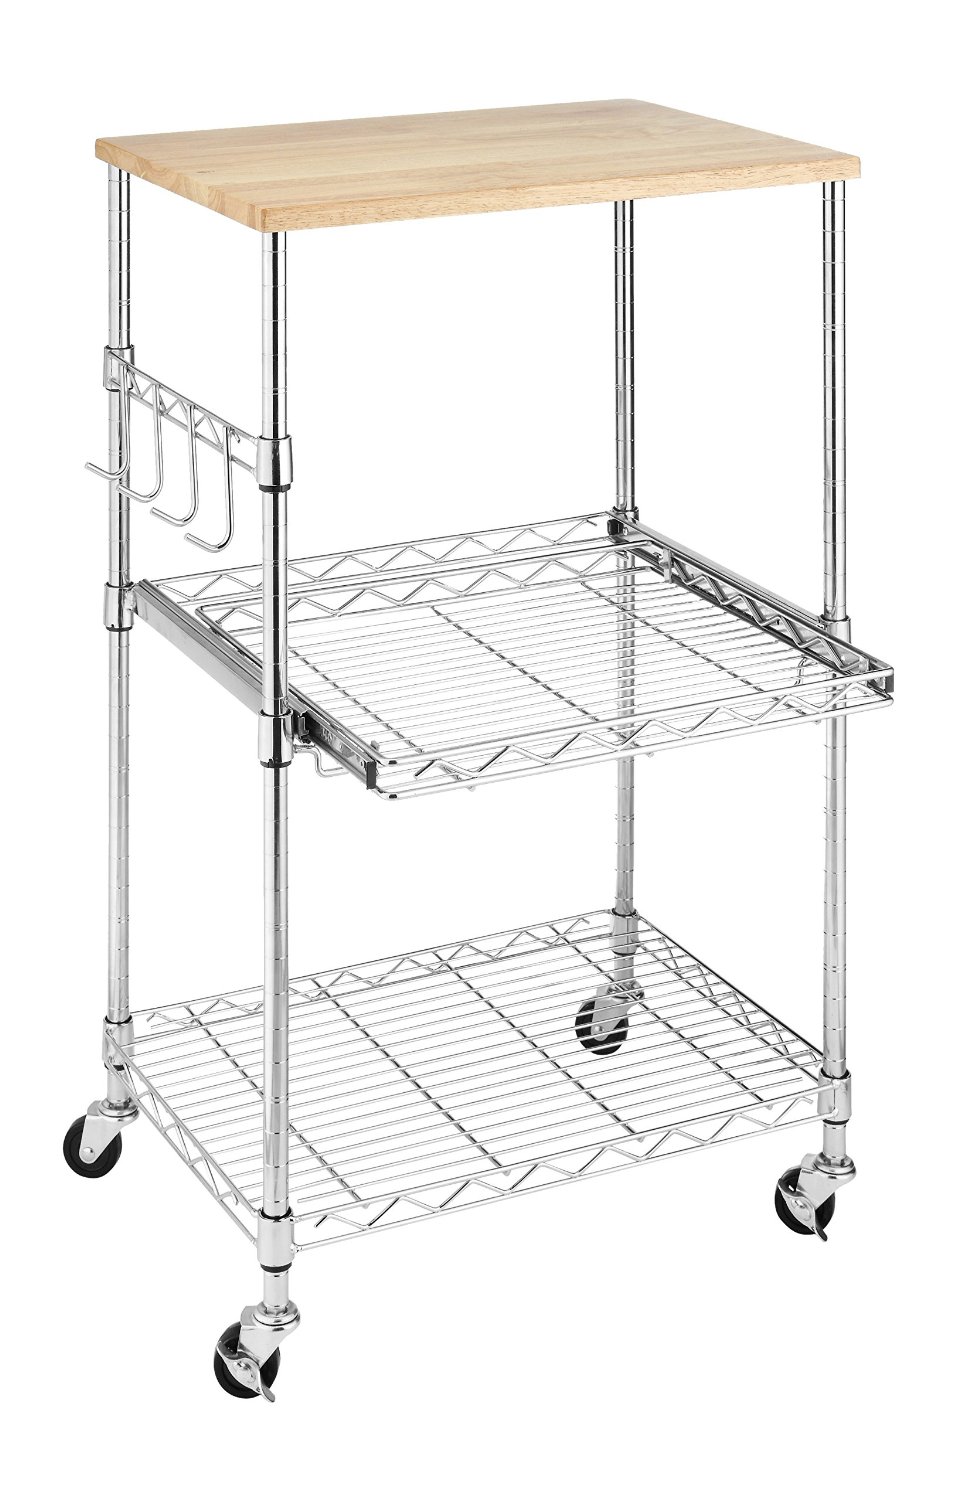 Microwave Cart/Stand Reviews